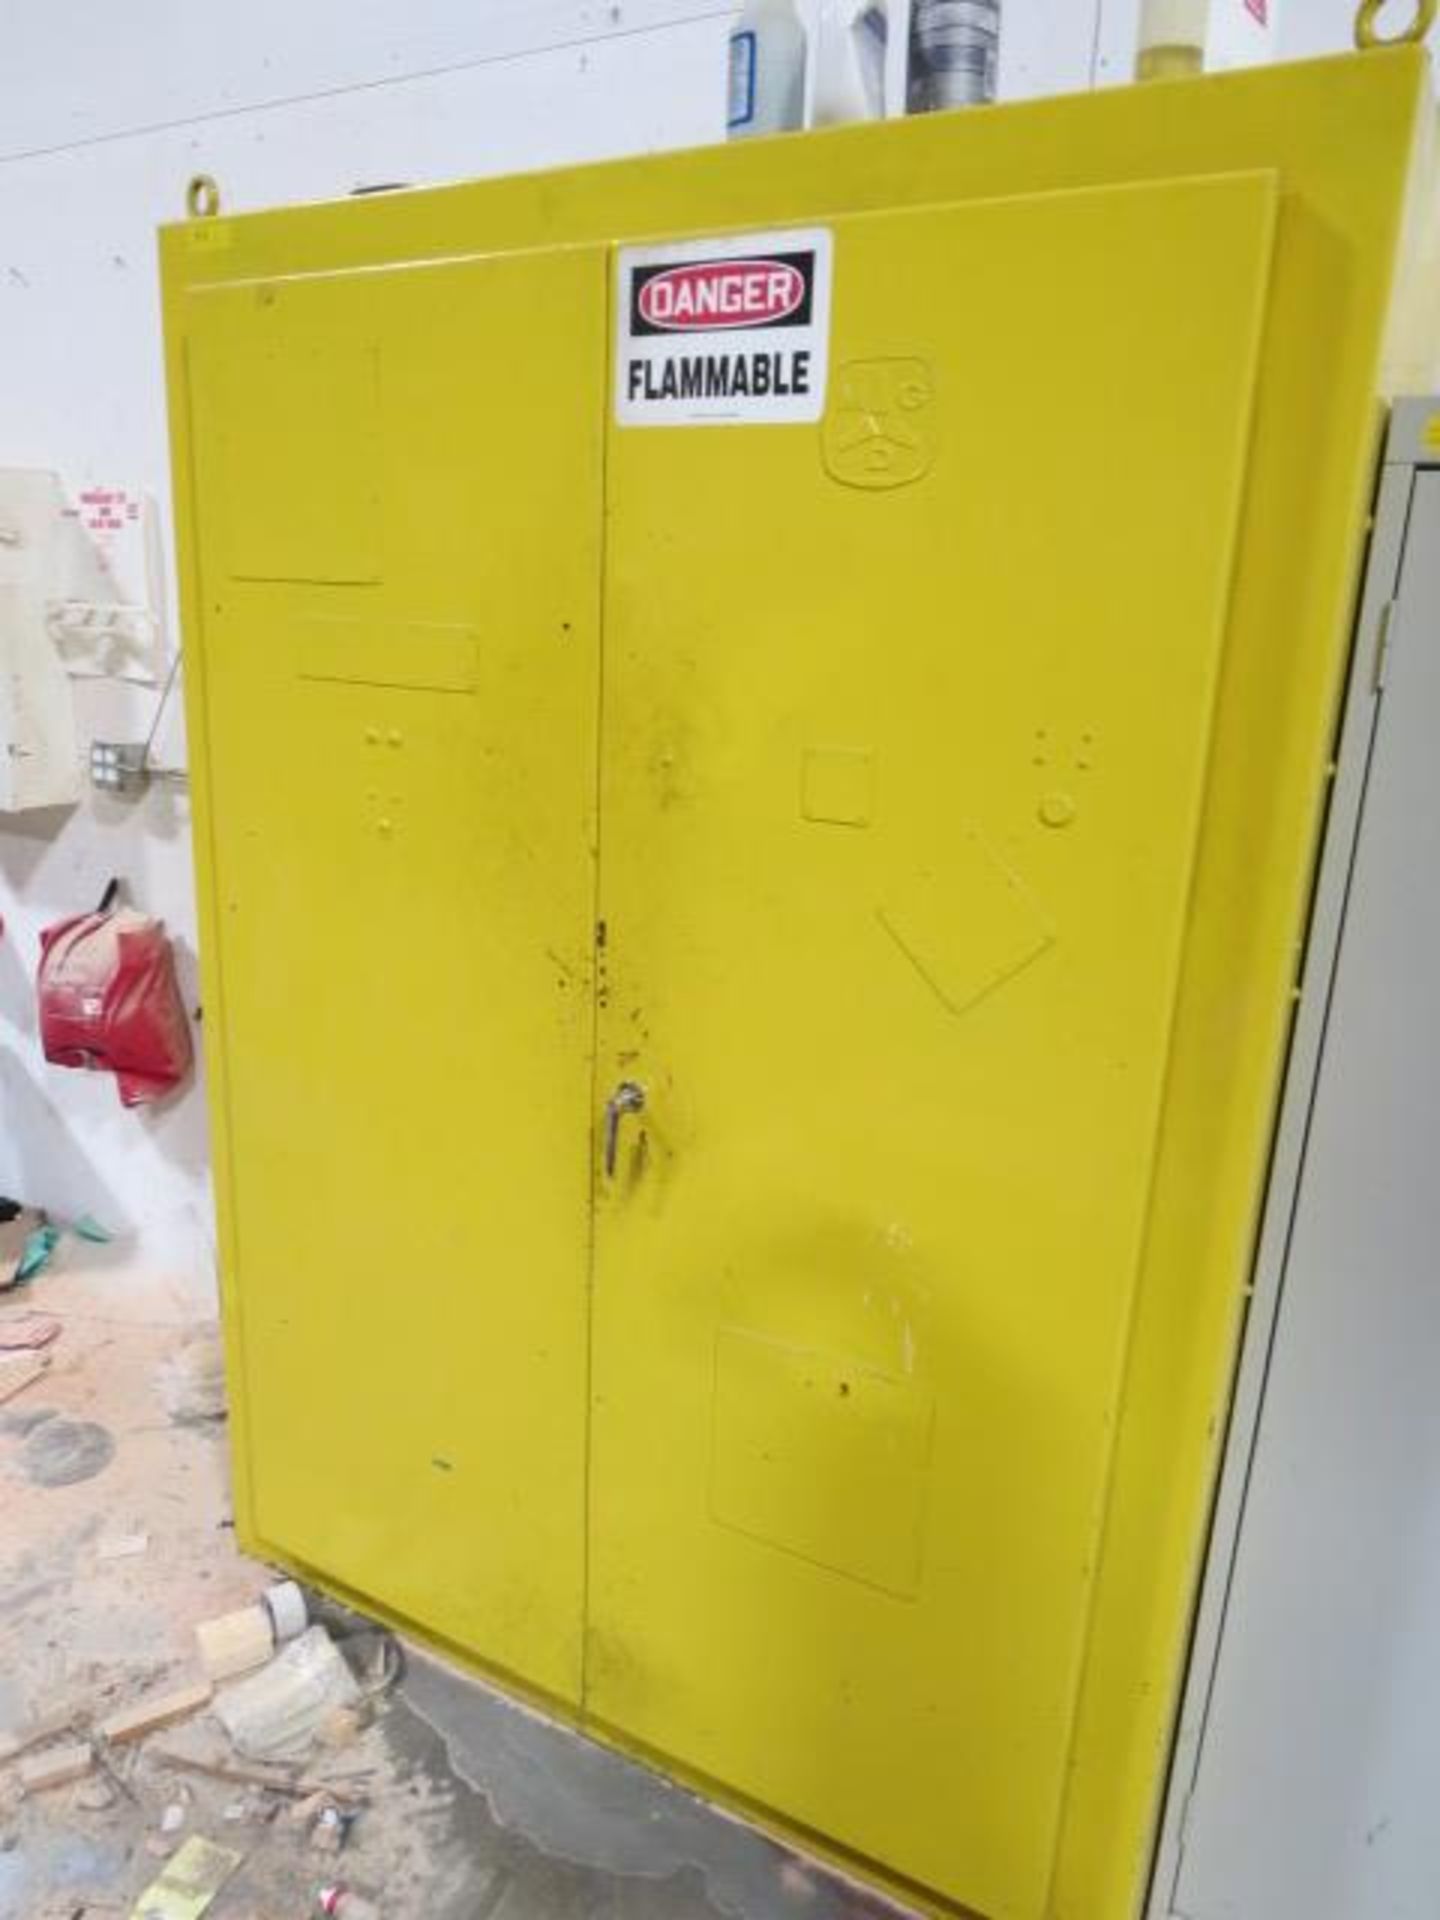 2 Door Fire Proof Metal Storage Cabinet, Includes Contents Consisting of Assorted Spray Paints,